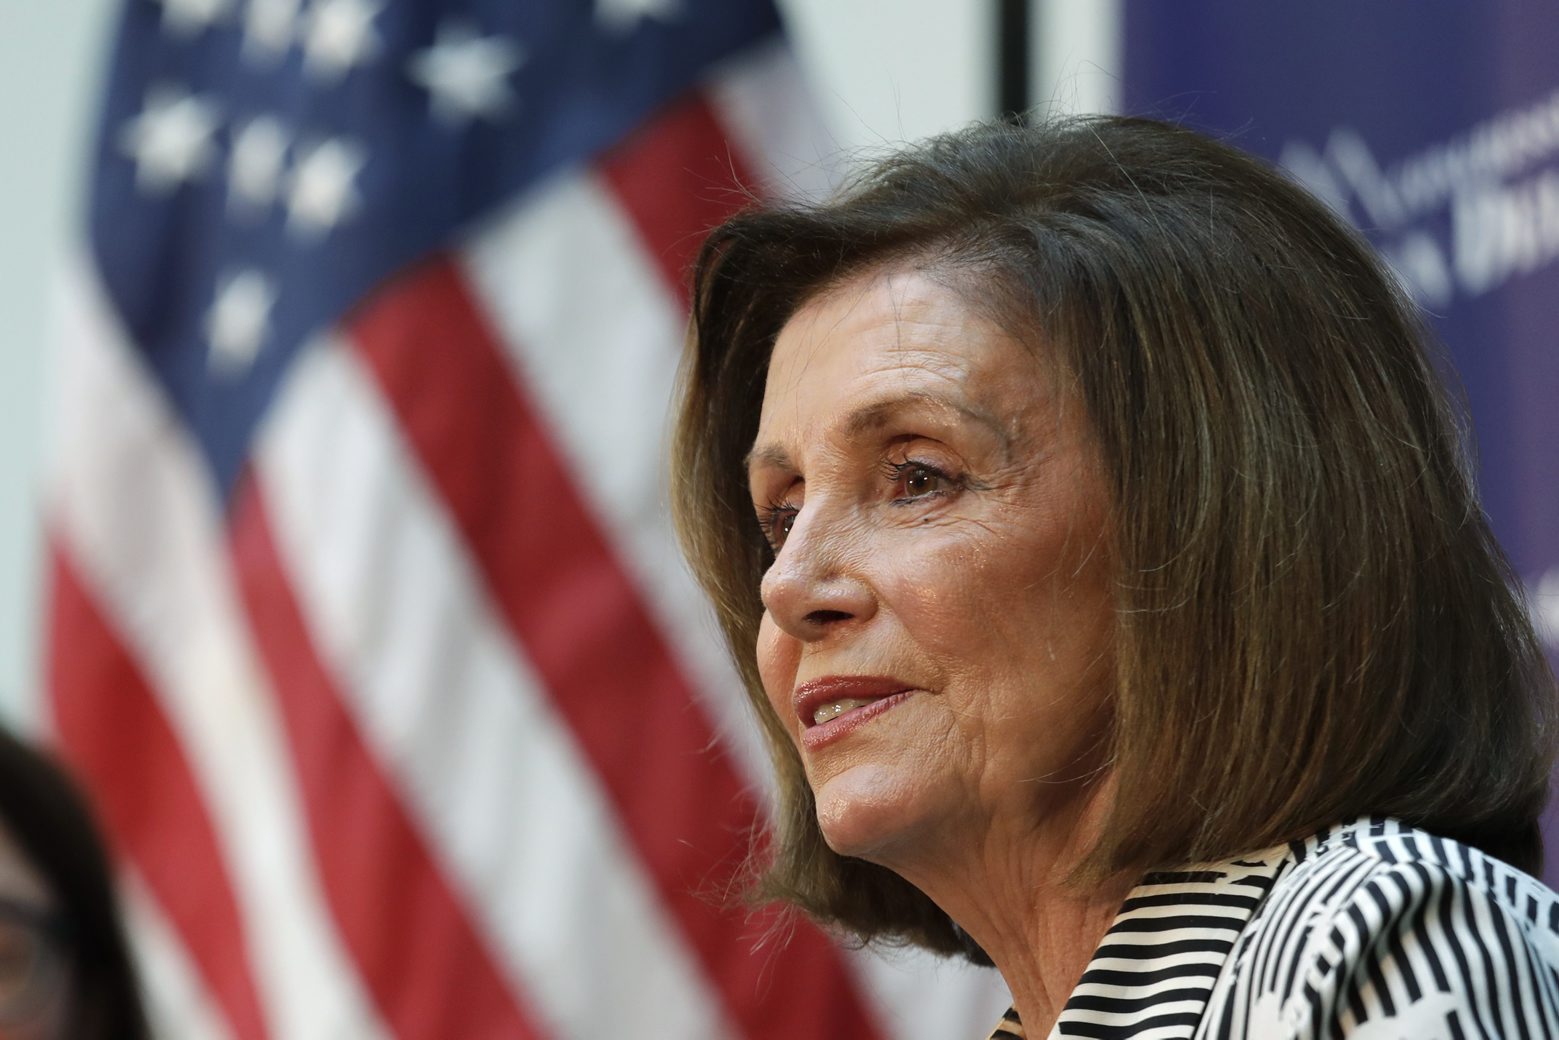 Speaker of the House Nancy Pelosi, D-Calif., listens during a talk about lowering the cost of prescription drug prices Tuesday, Oct. 8, 2019, at Harborview Medical Center in Seattle. (AP Photo/Elaine Thompson)
Nancy Pelosi Nancy Pelosi Washington